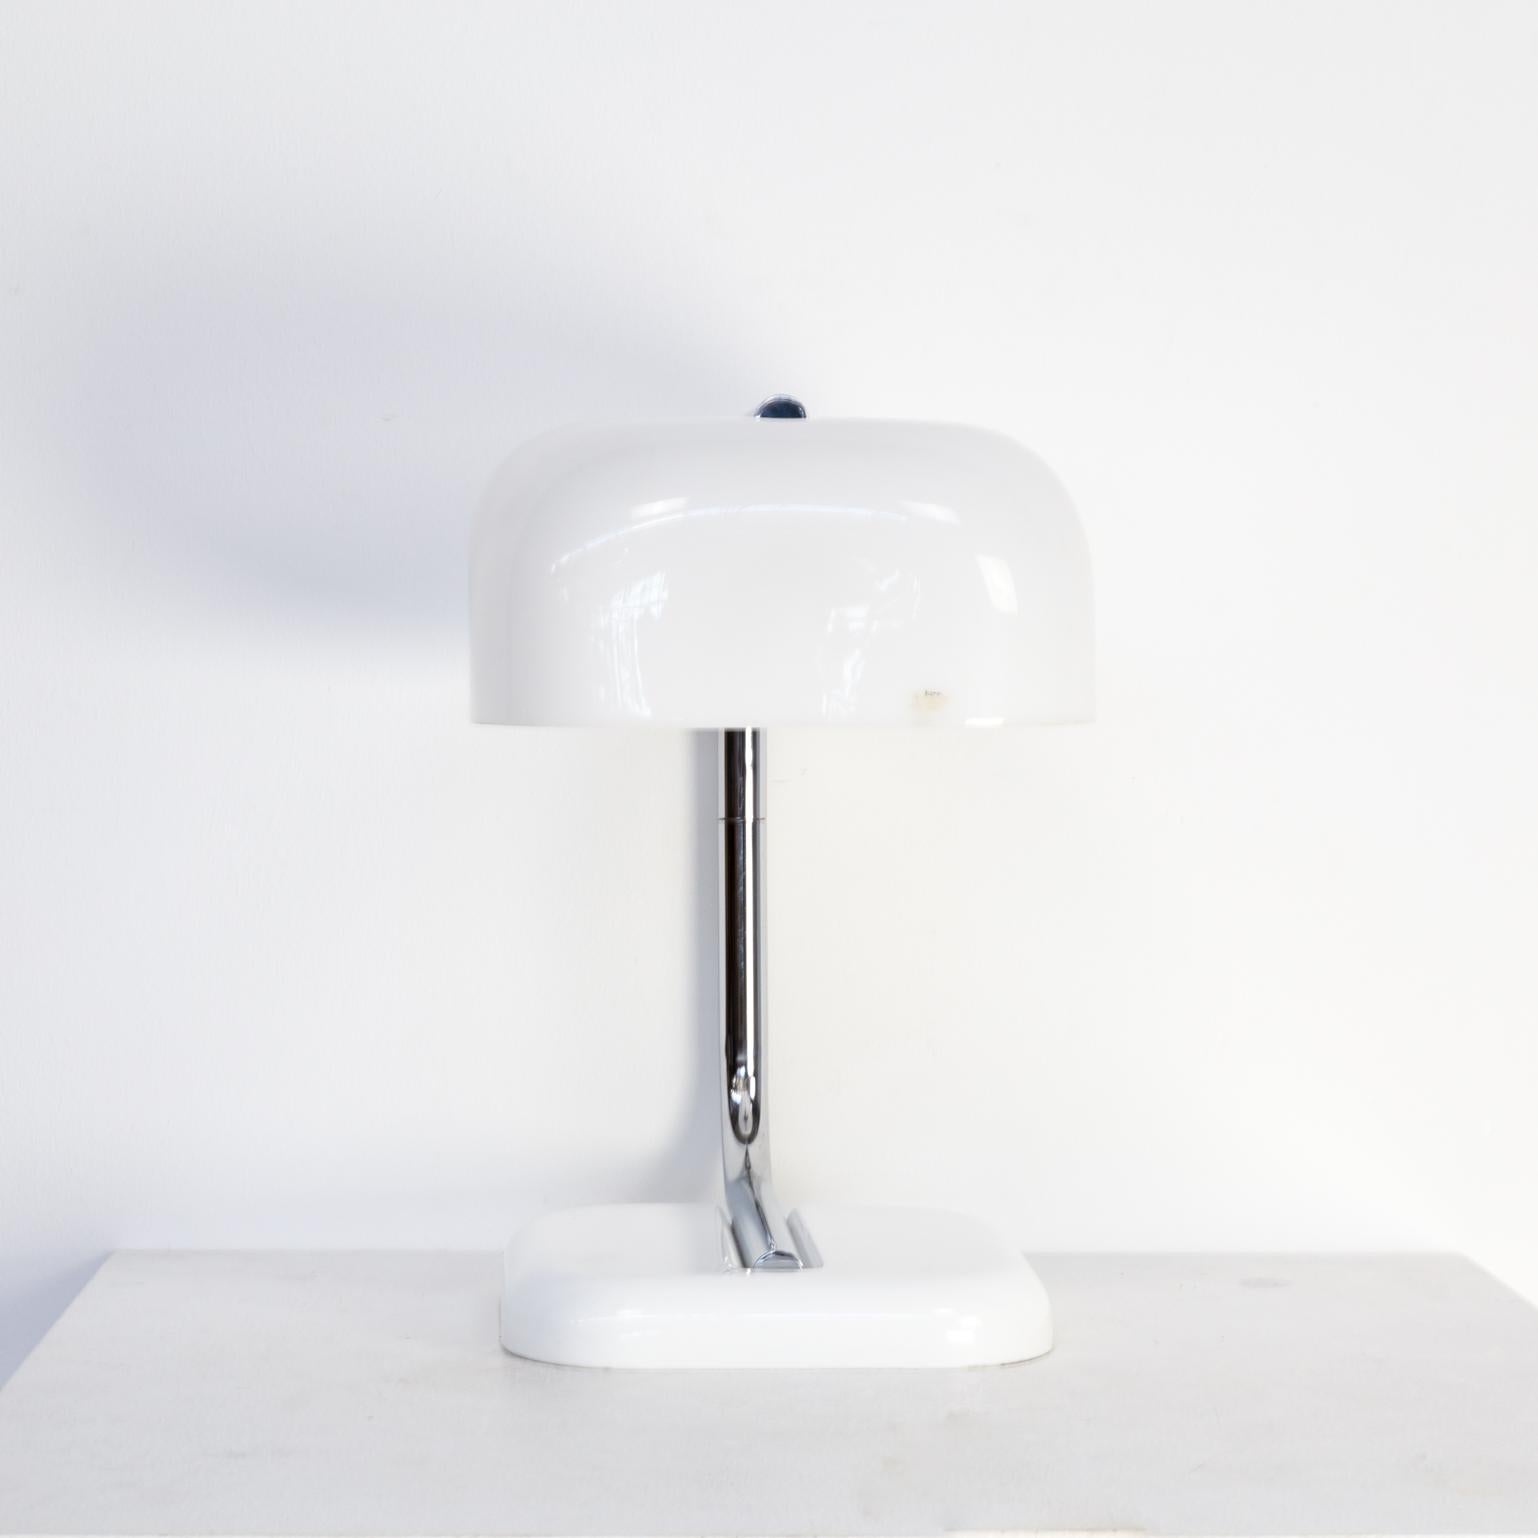 Metal 1970s Guzinni Square and Turnable Table Lamp For Sale